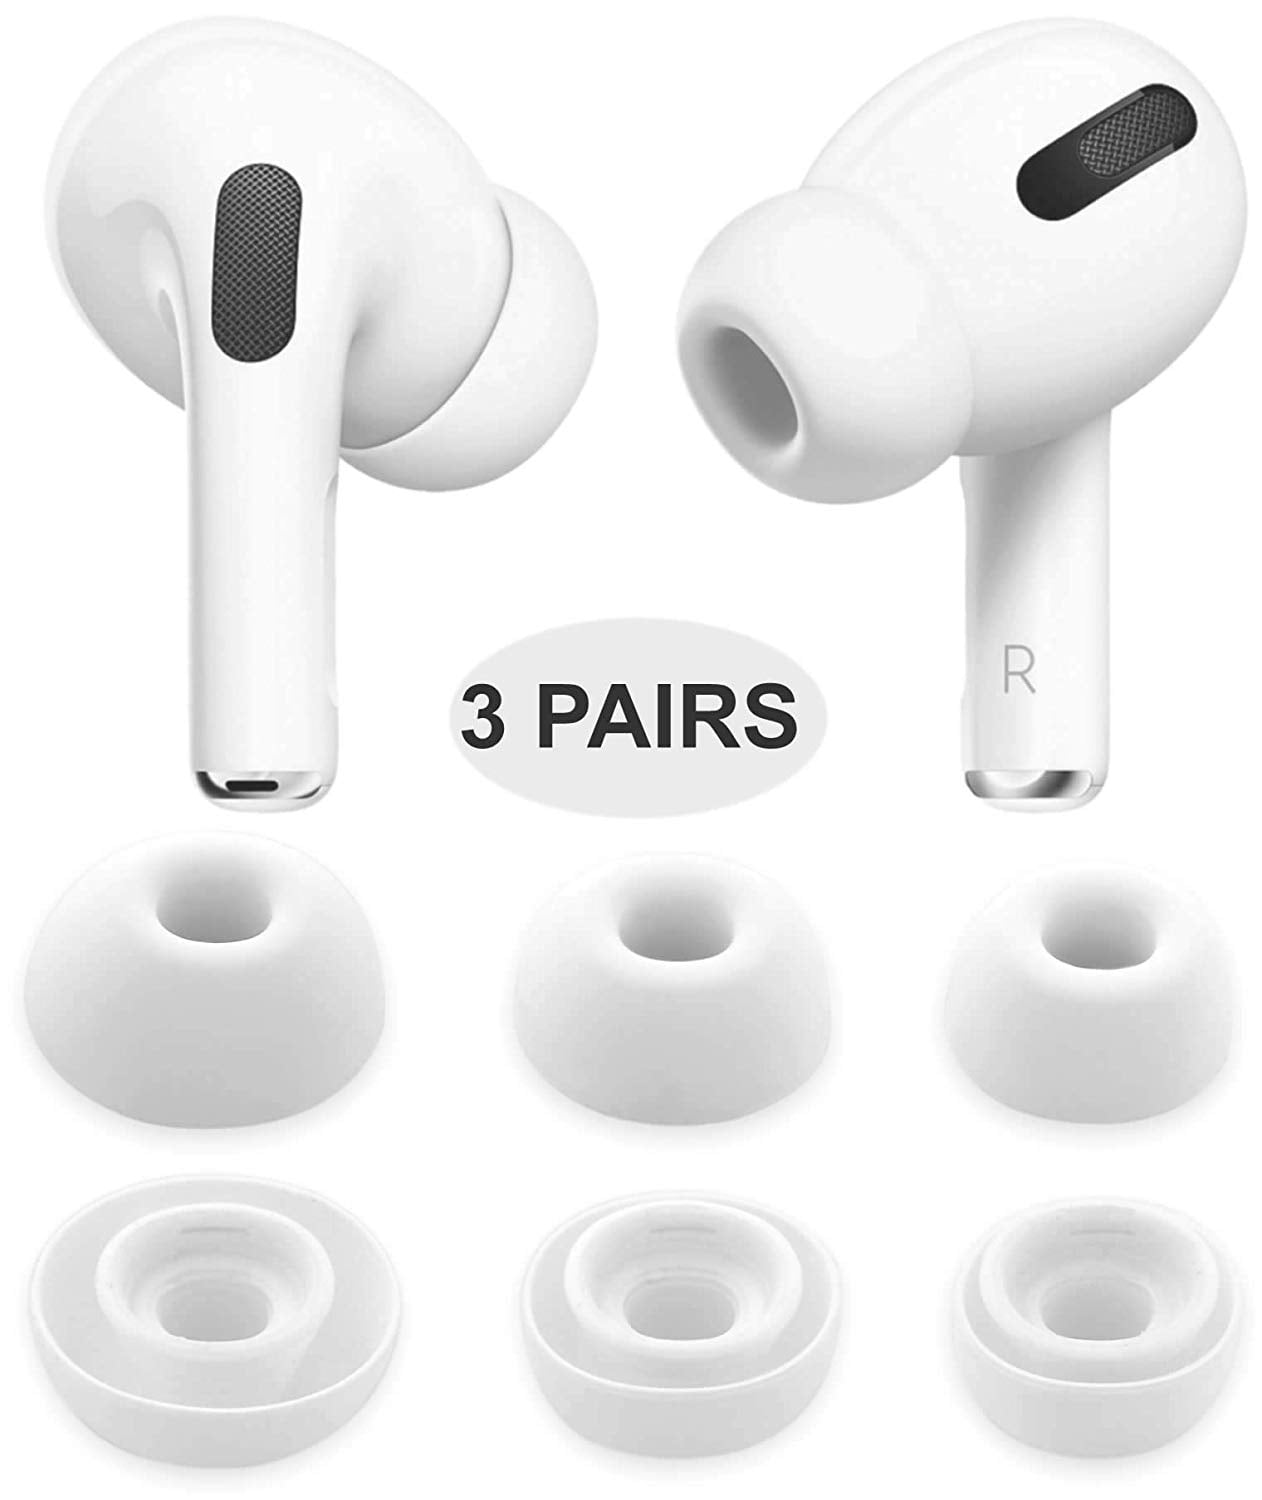 Apple AirPods Pro 2nd generation White MQDAM/A   Best Buy